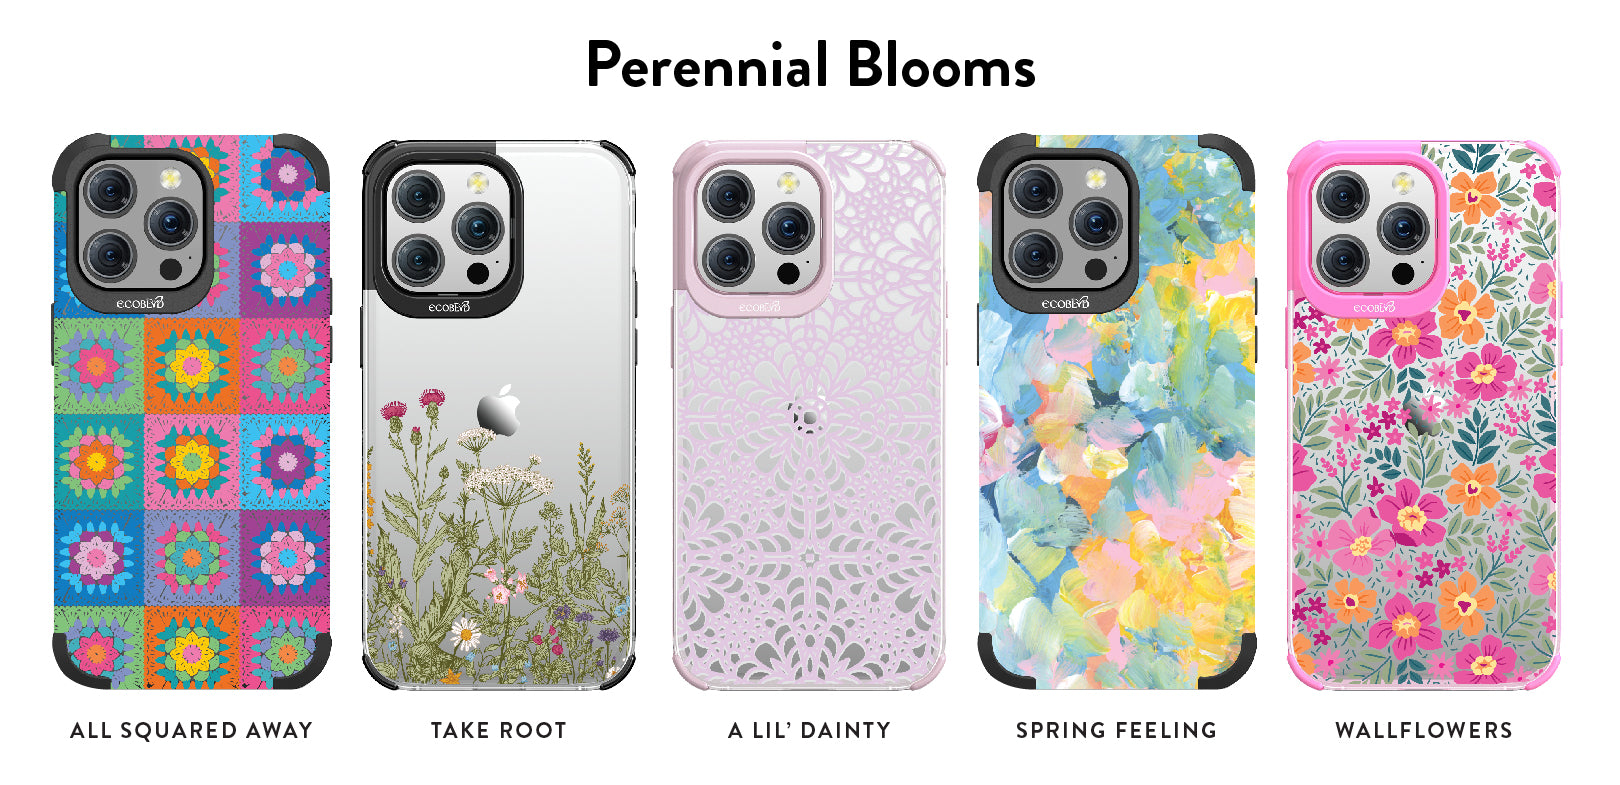 Perenial Blooms - Classic Spring Designs On Eco-Friendly Phone Cases